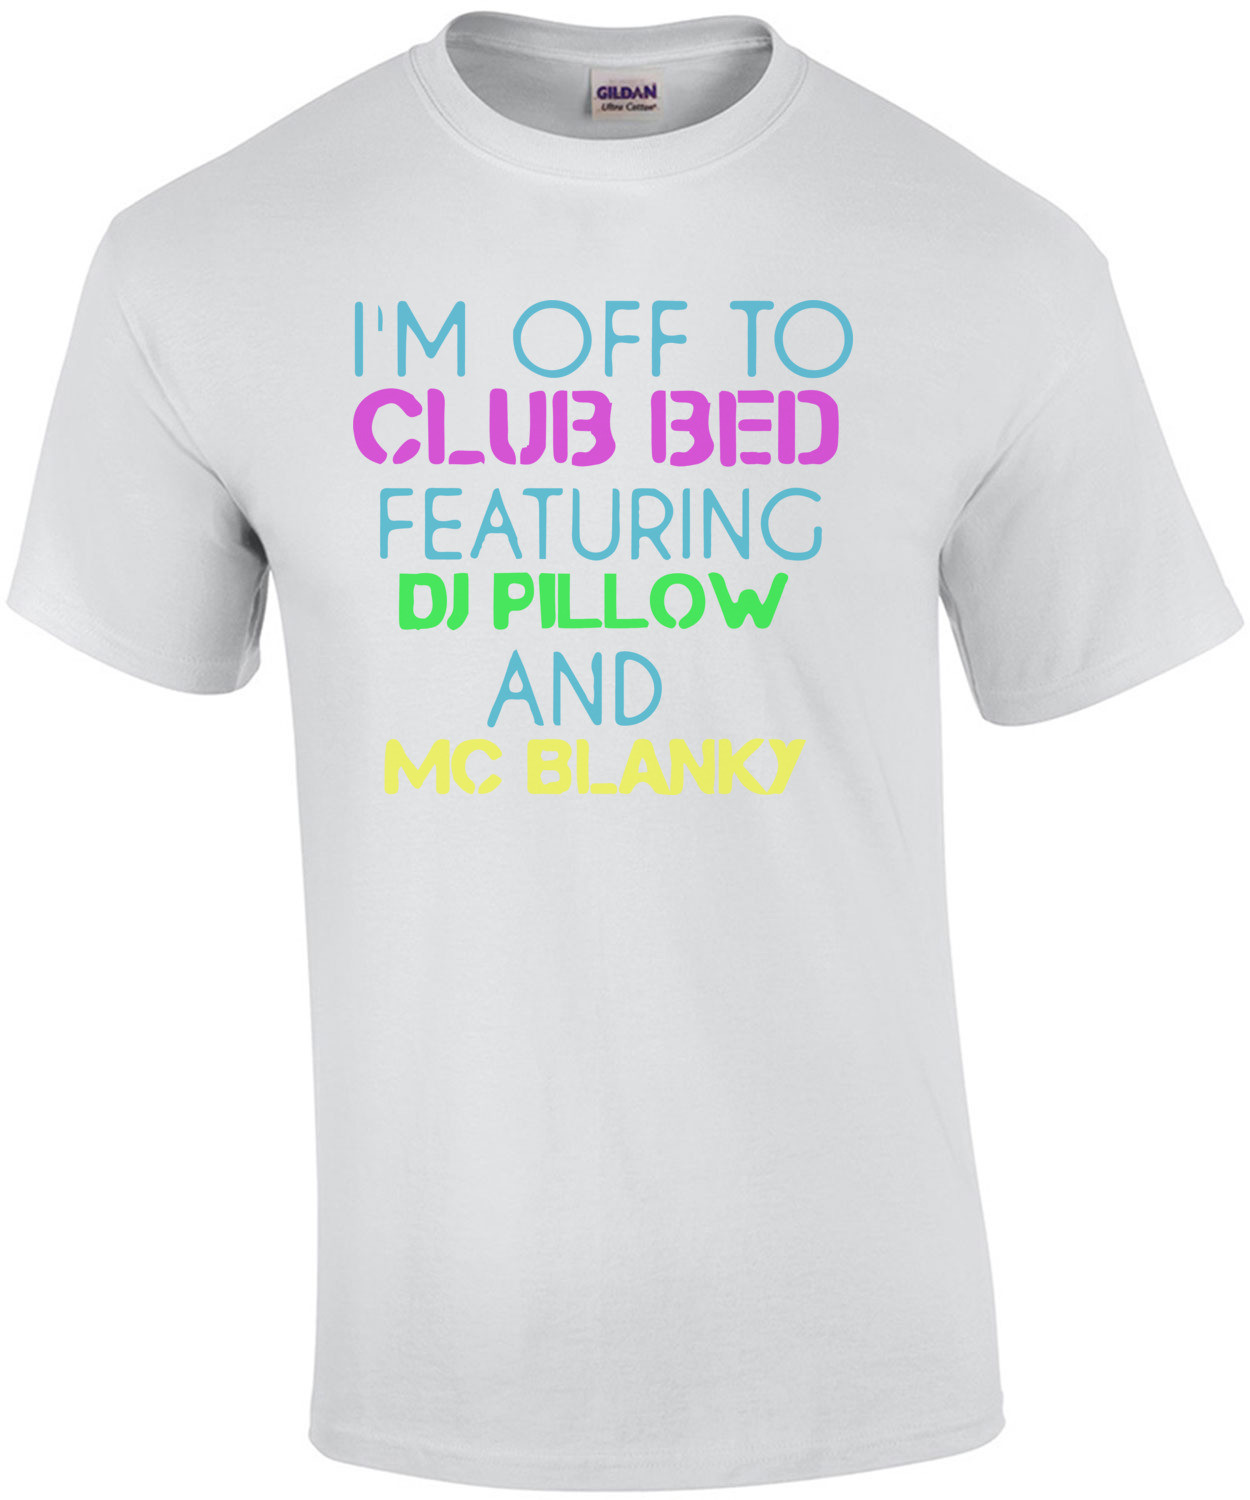 I'm off to club bed featuring dj pillow and mc blanky t-shirt